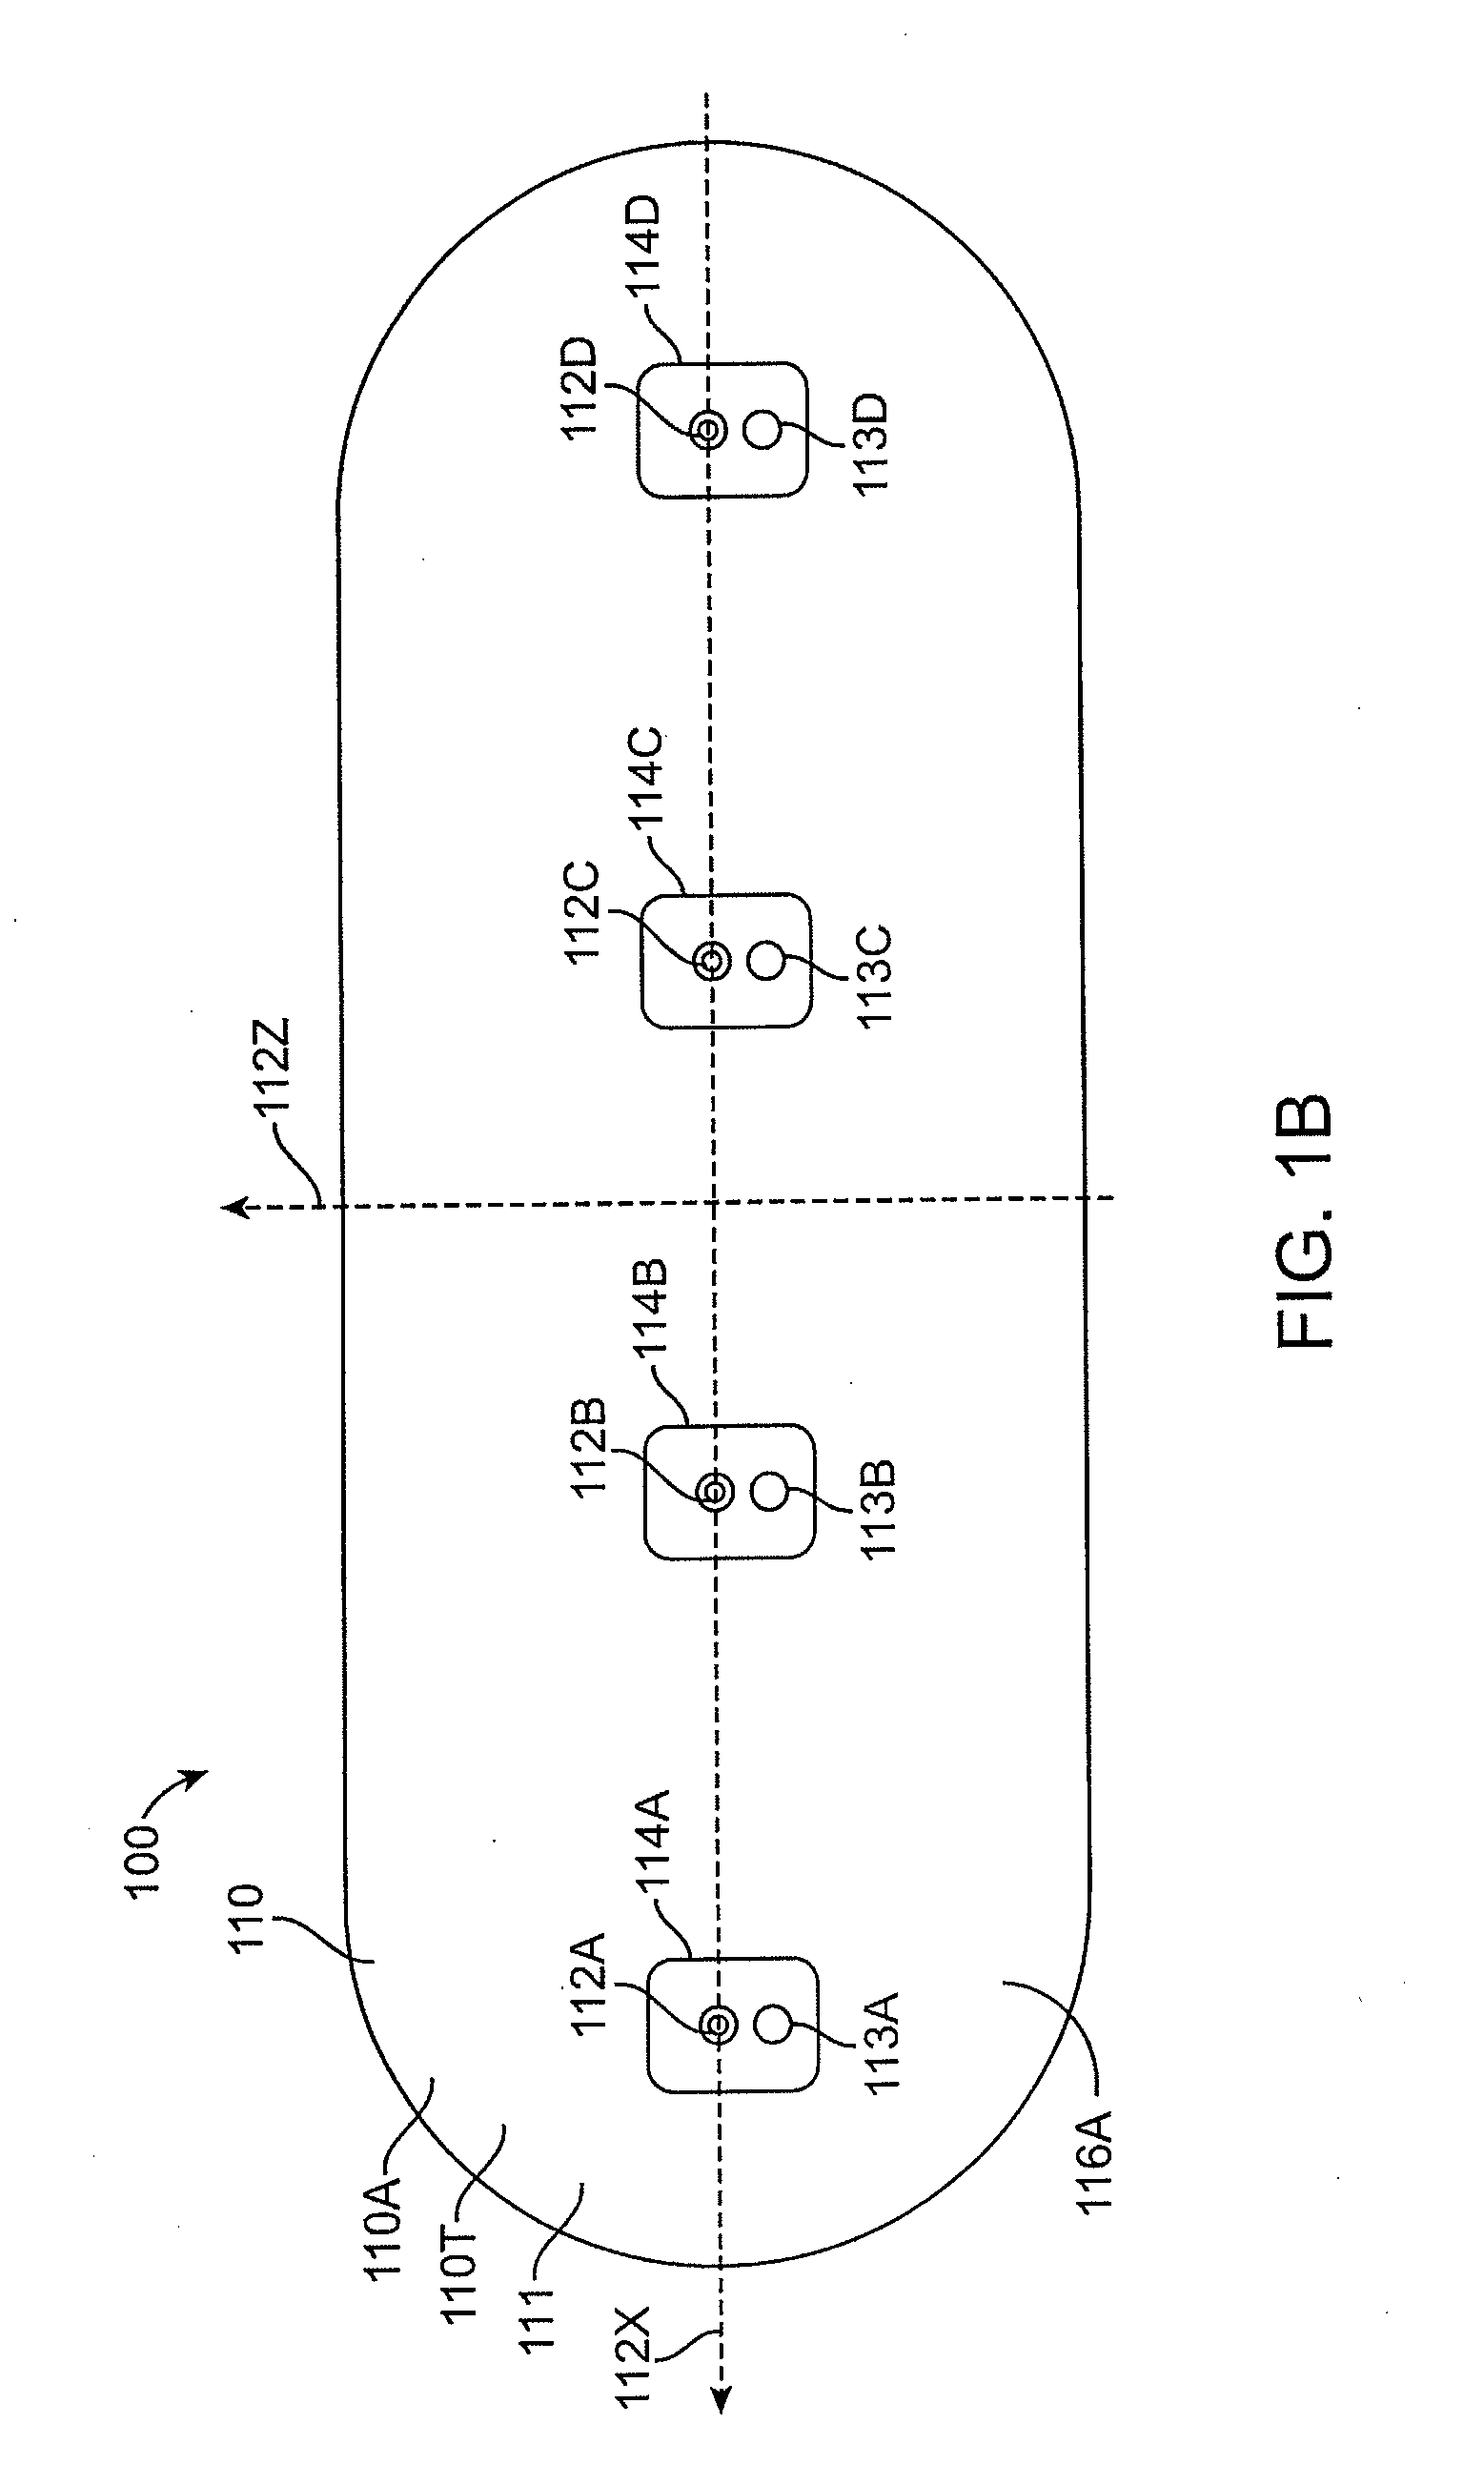 Method and Apparatus for Monitoring Fluid Content within Body Tissues